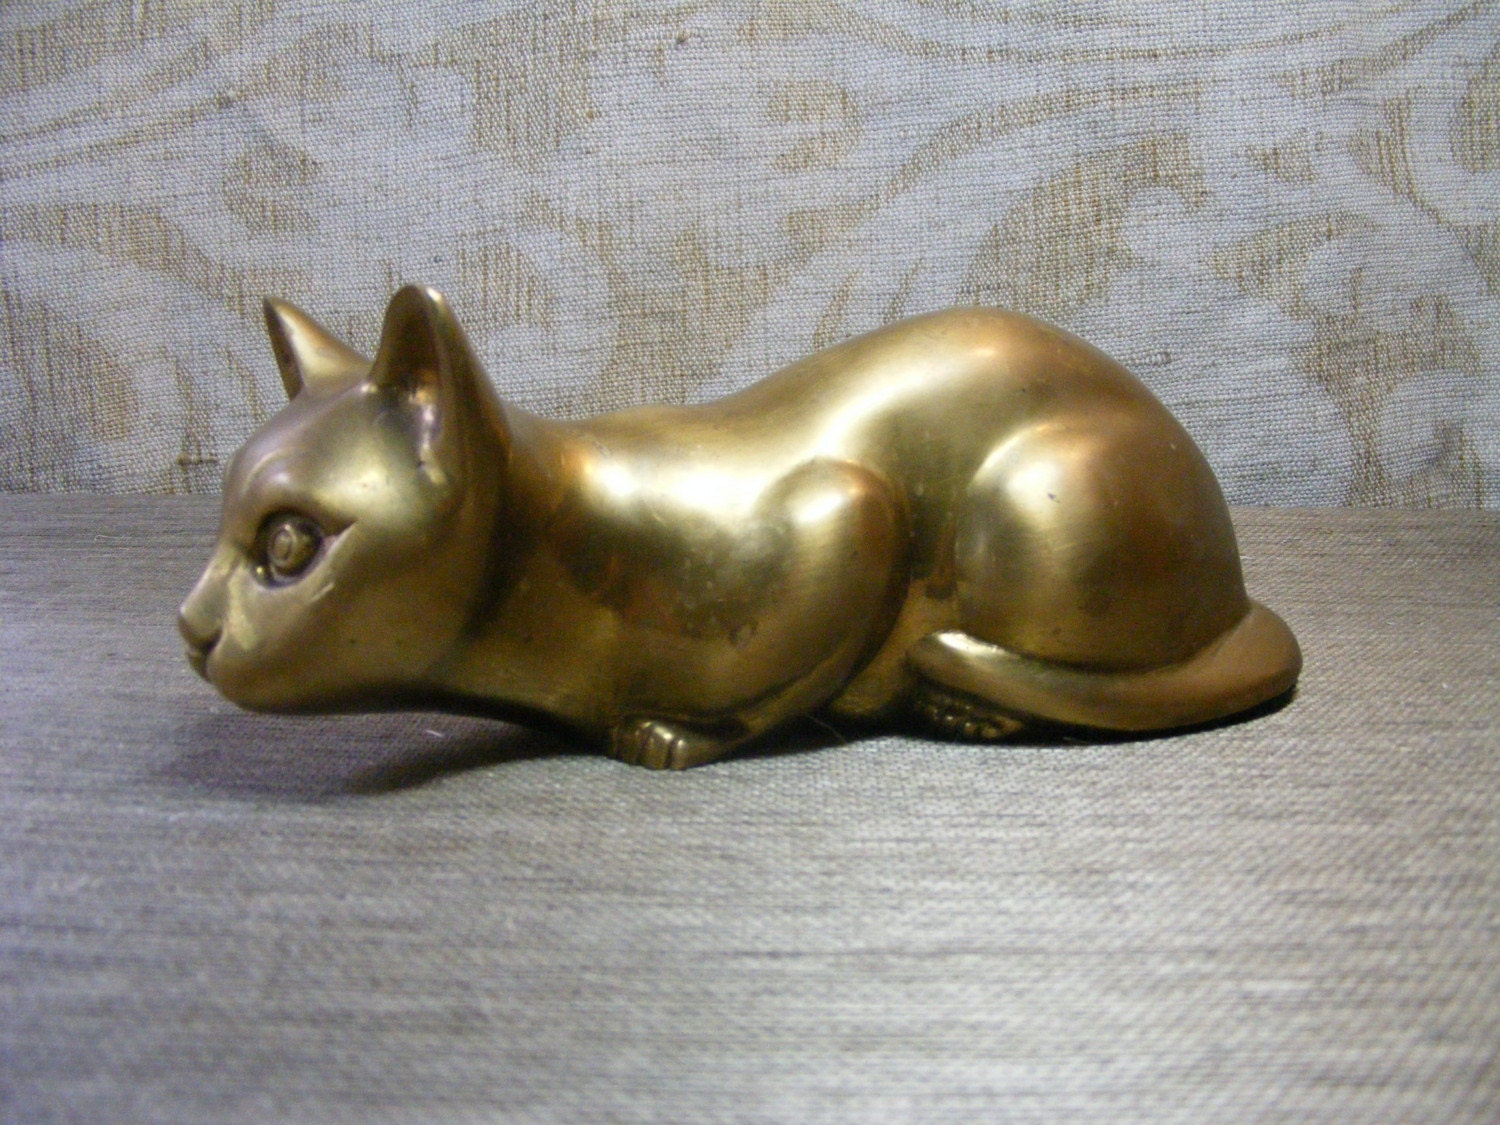 Heavy, Brass, Cat, Figure, Paperweight, Desk, Office, Library, by Violets And Grace on Etsy